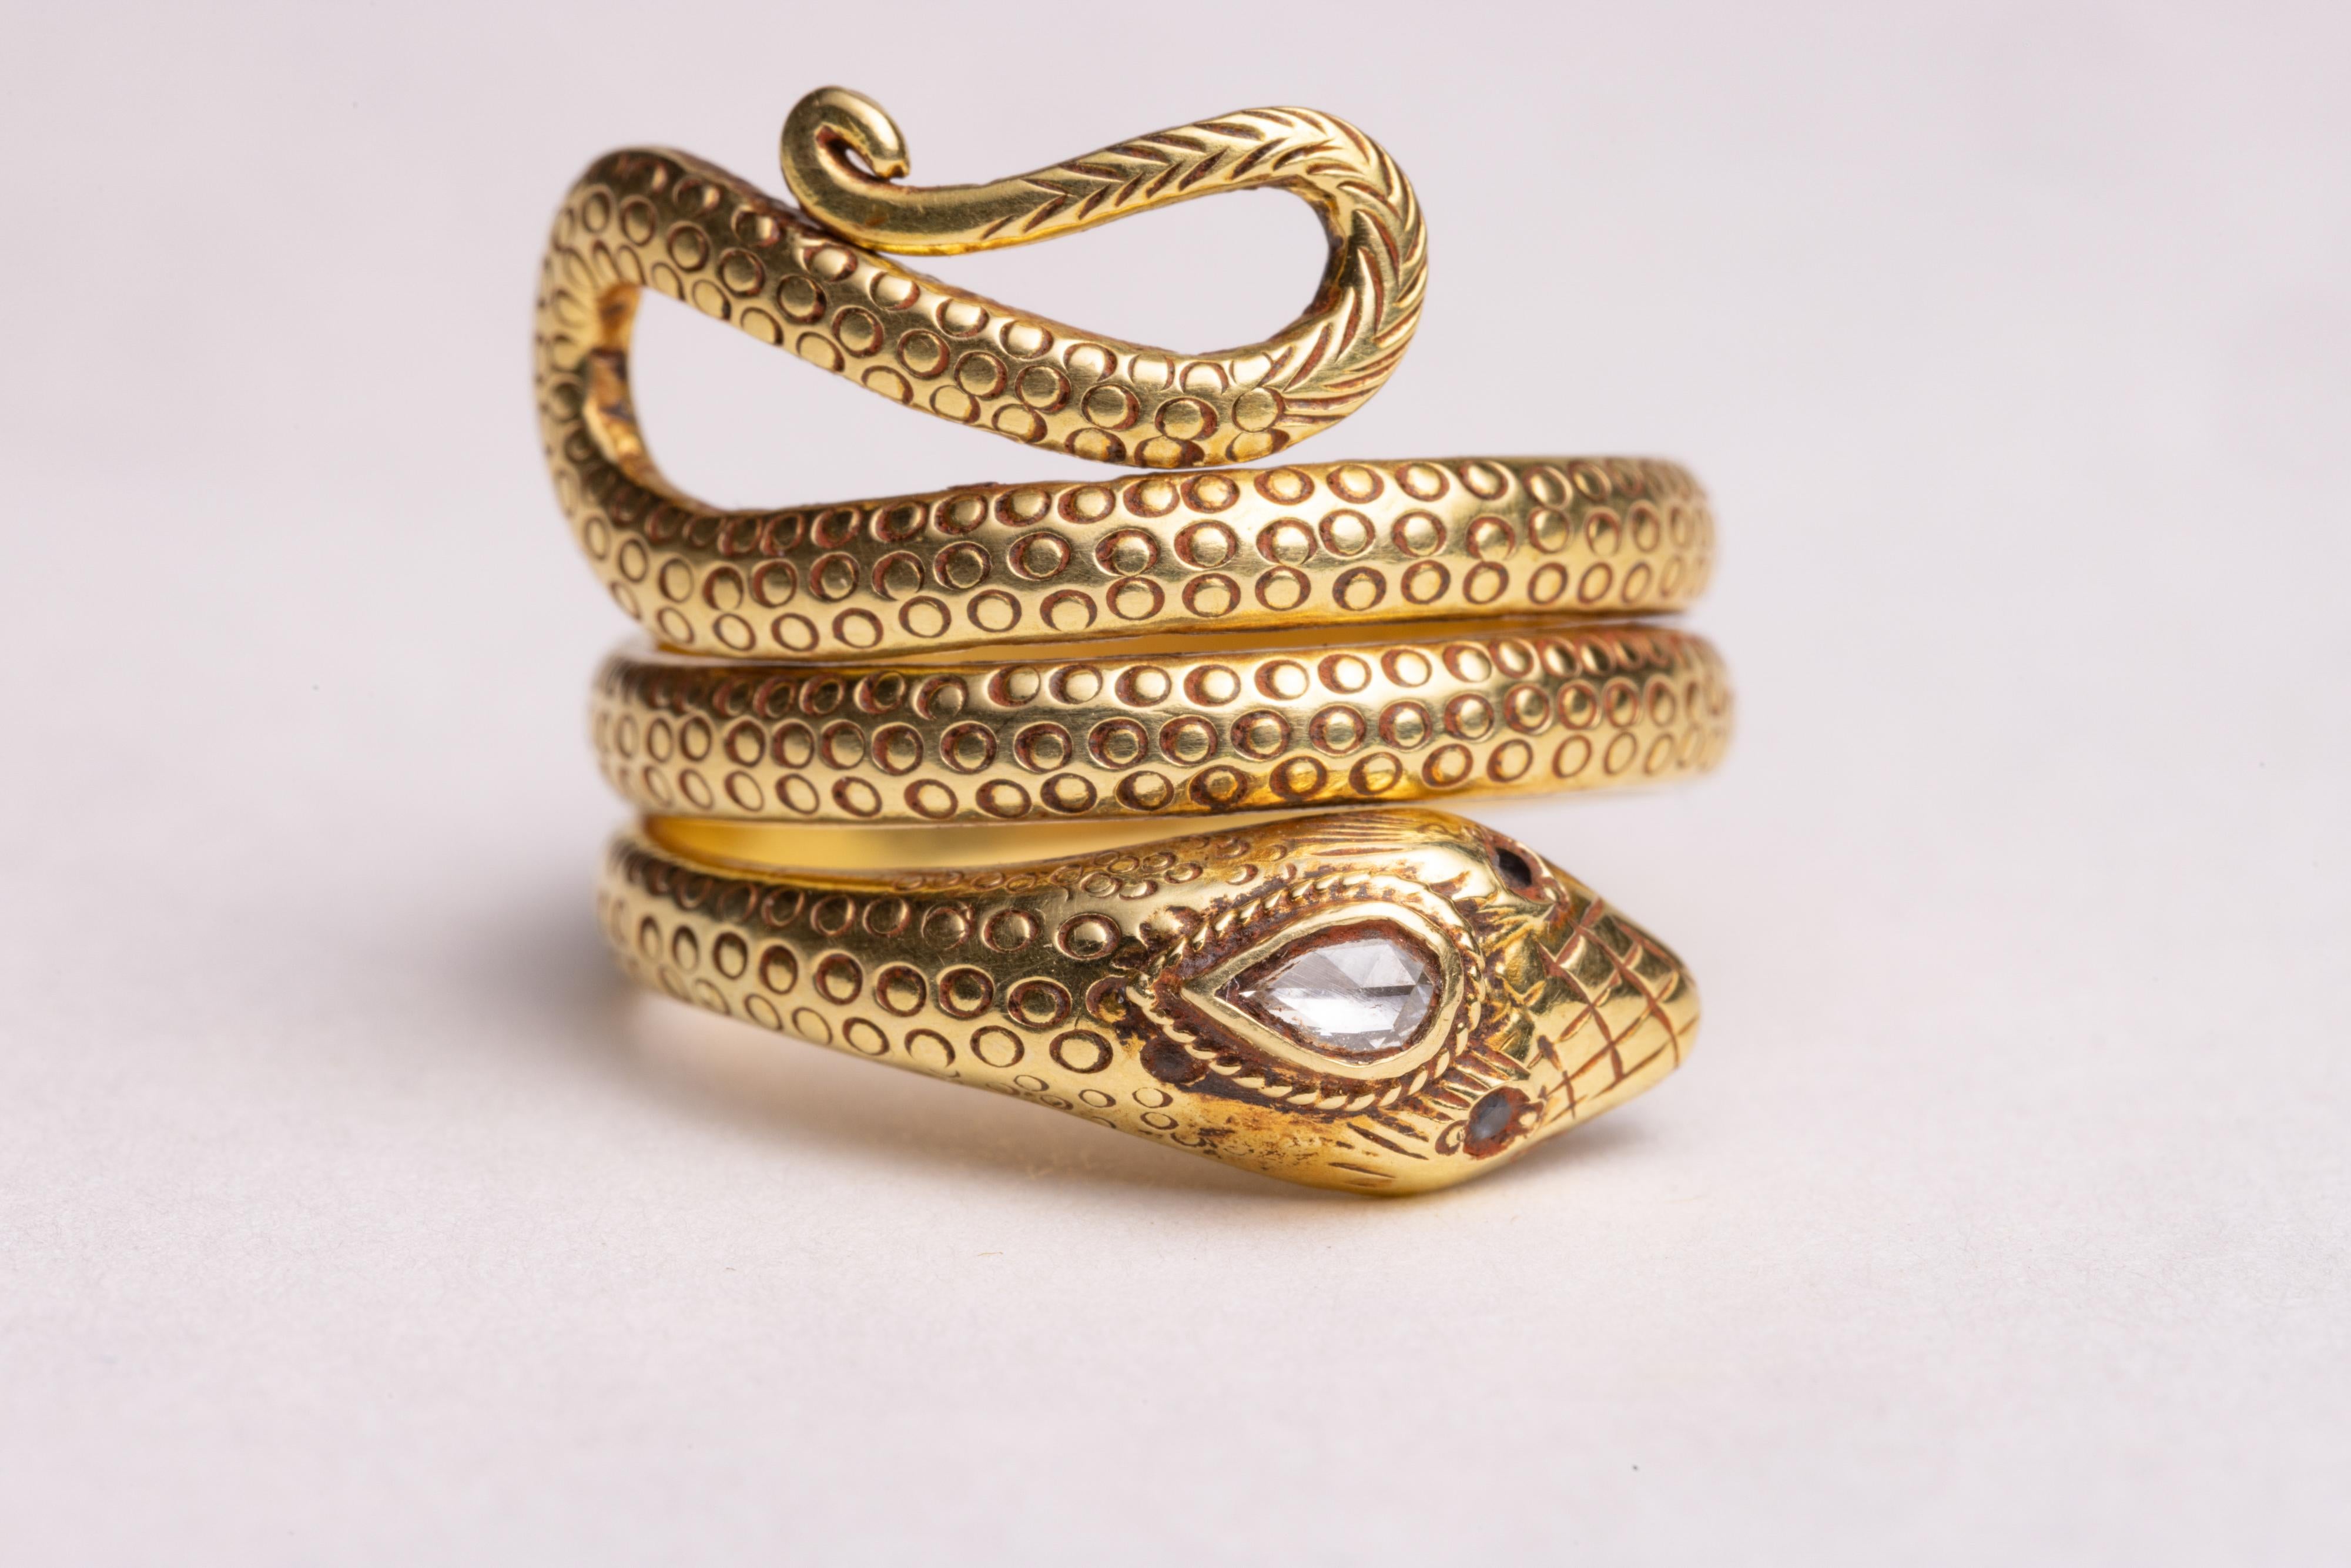 Pear Cut 18K Gold Textured Coiled Snake Ring with Diamond